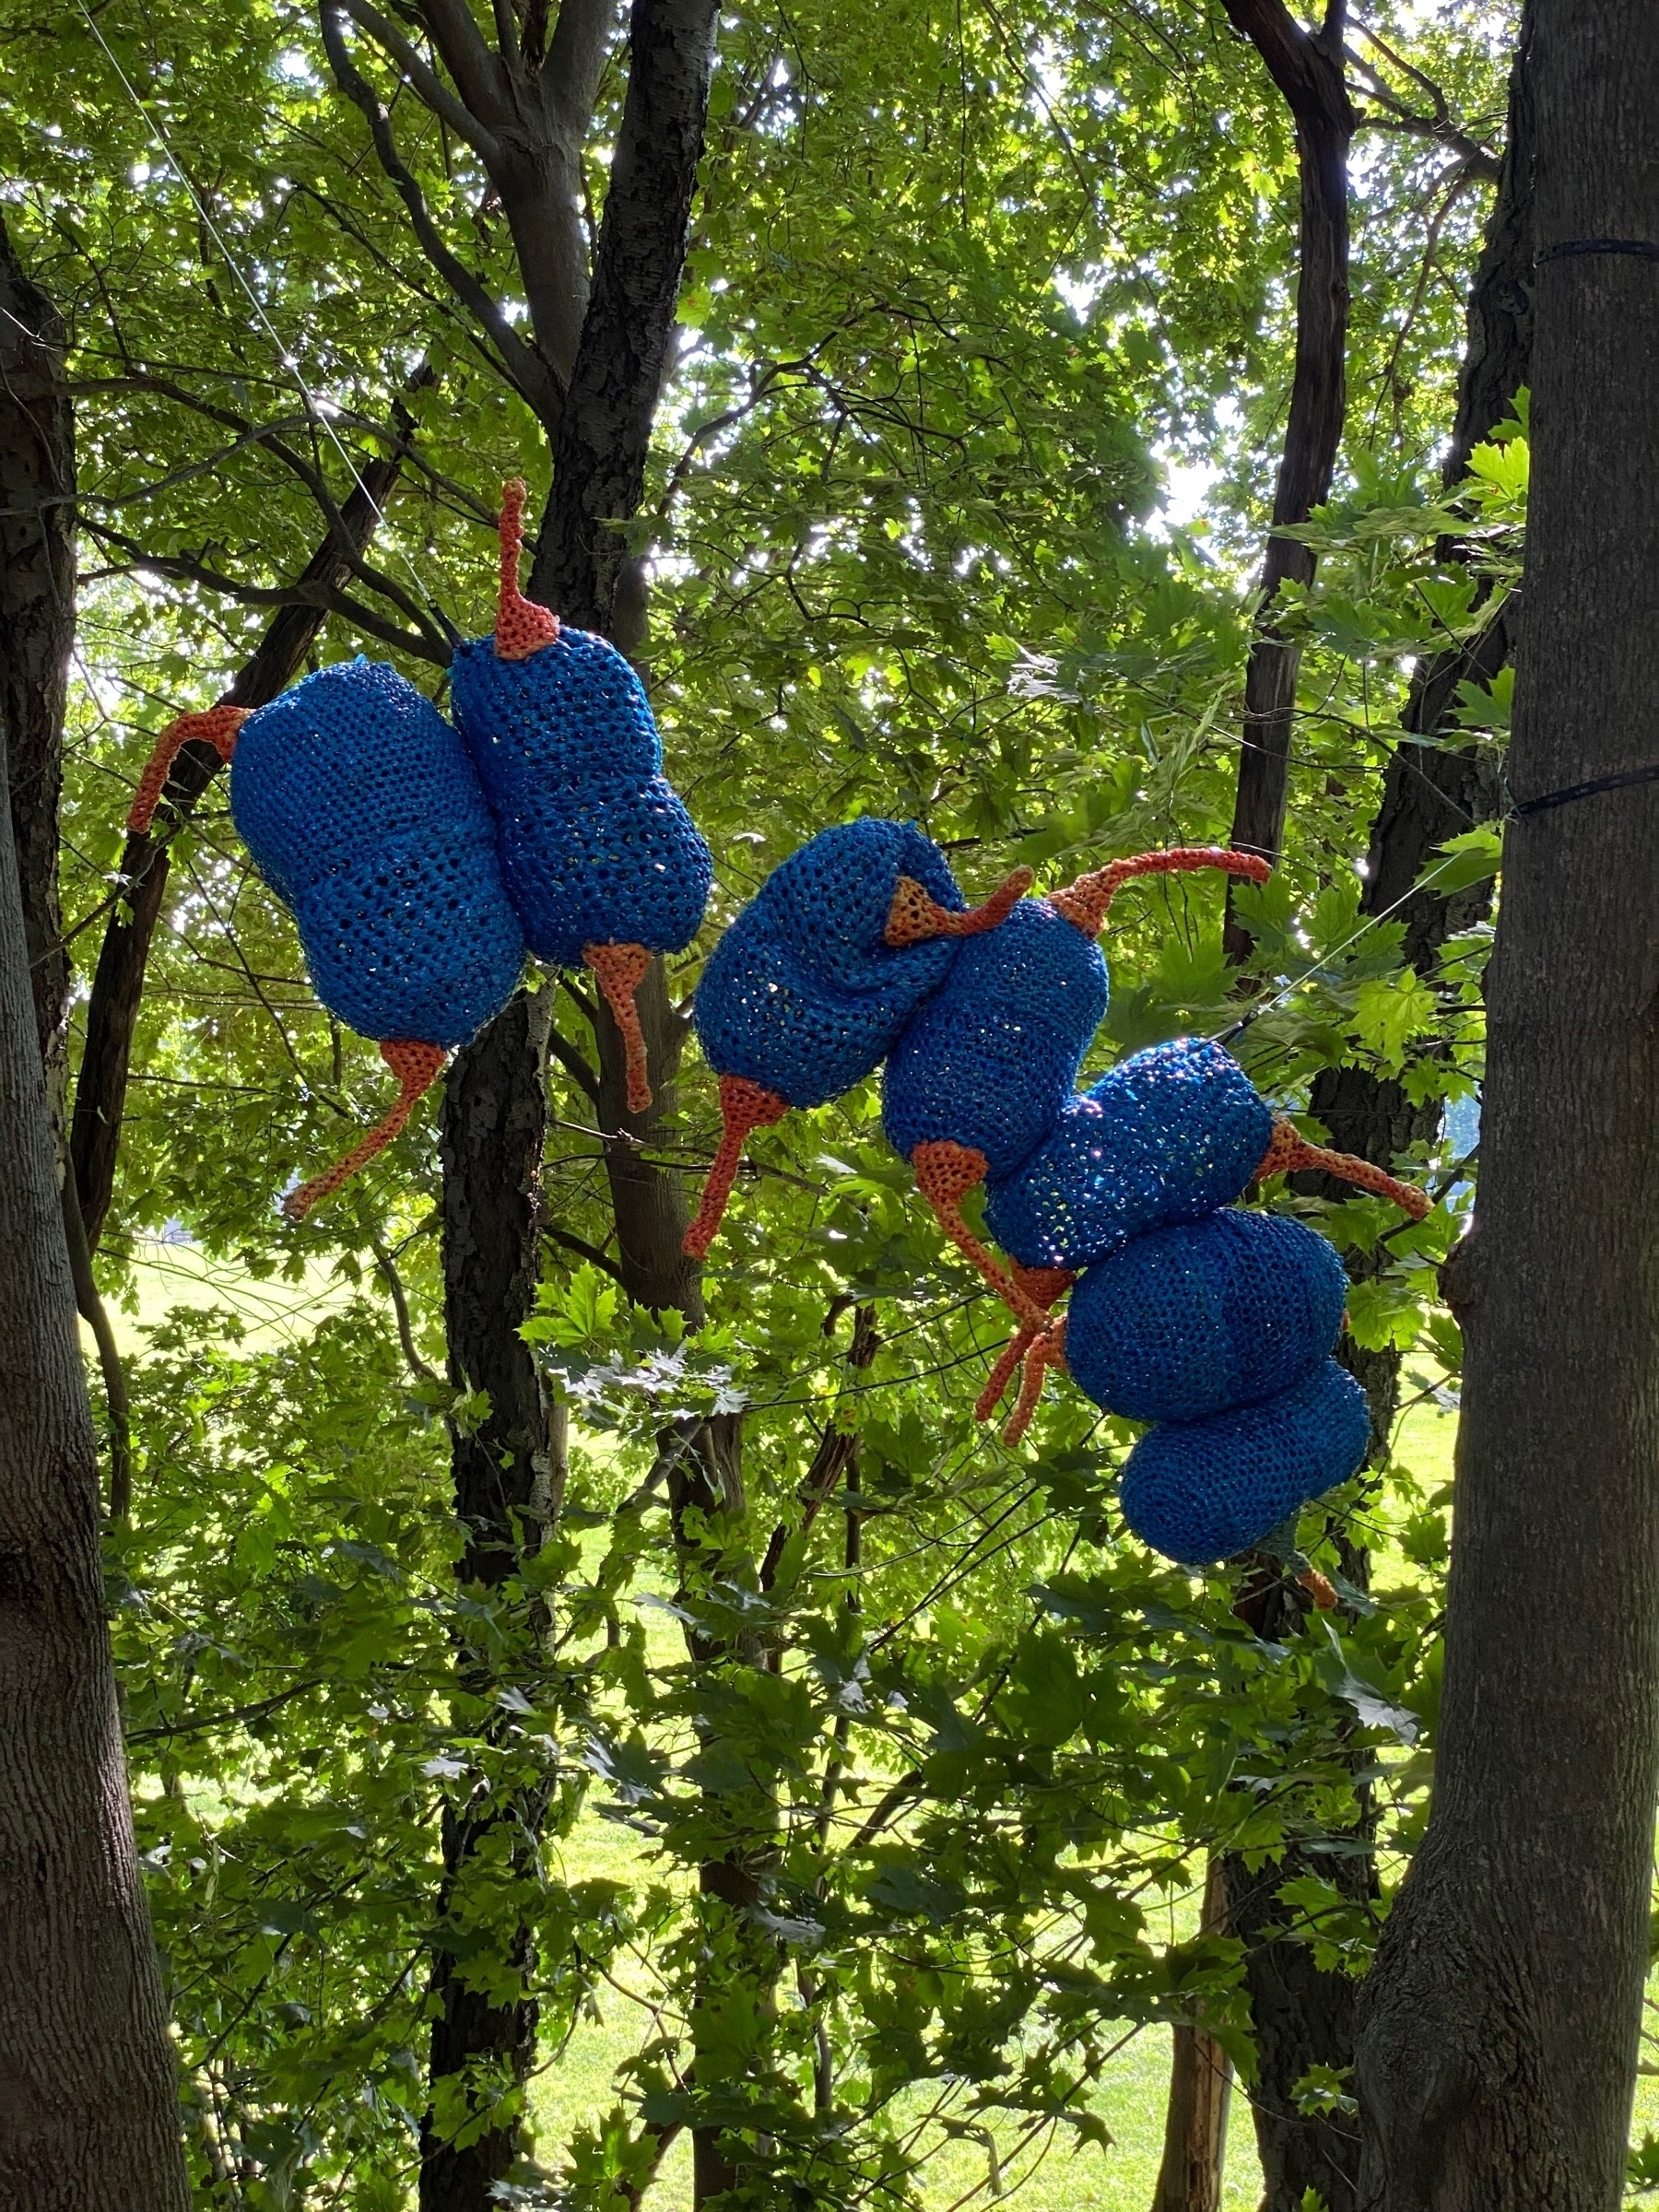 Fiber sculptures of microorganisms suspended between tree trunks with green leaves in the background.